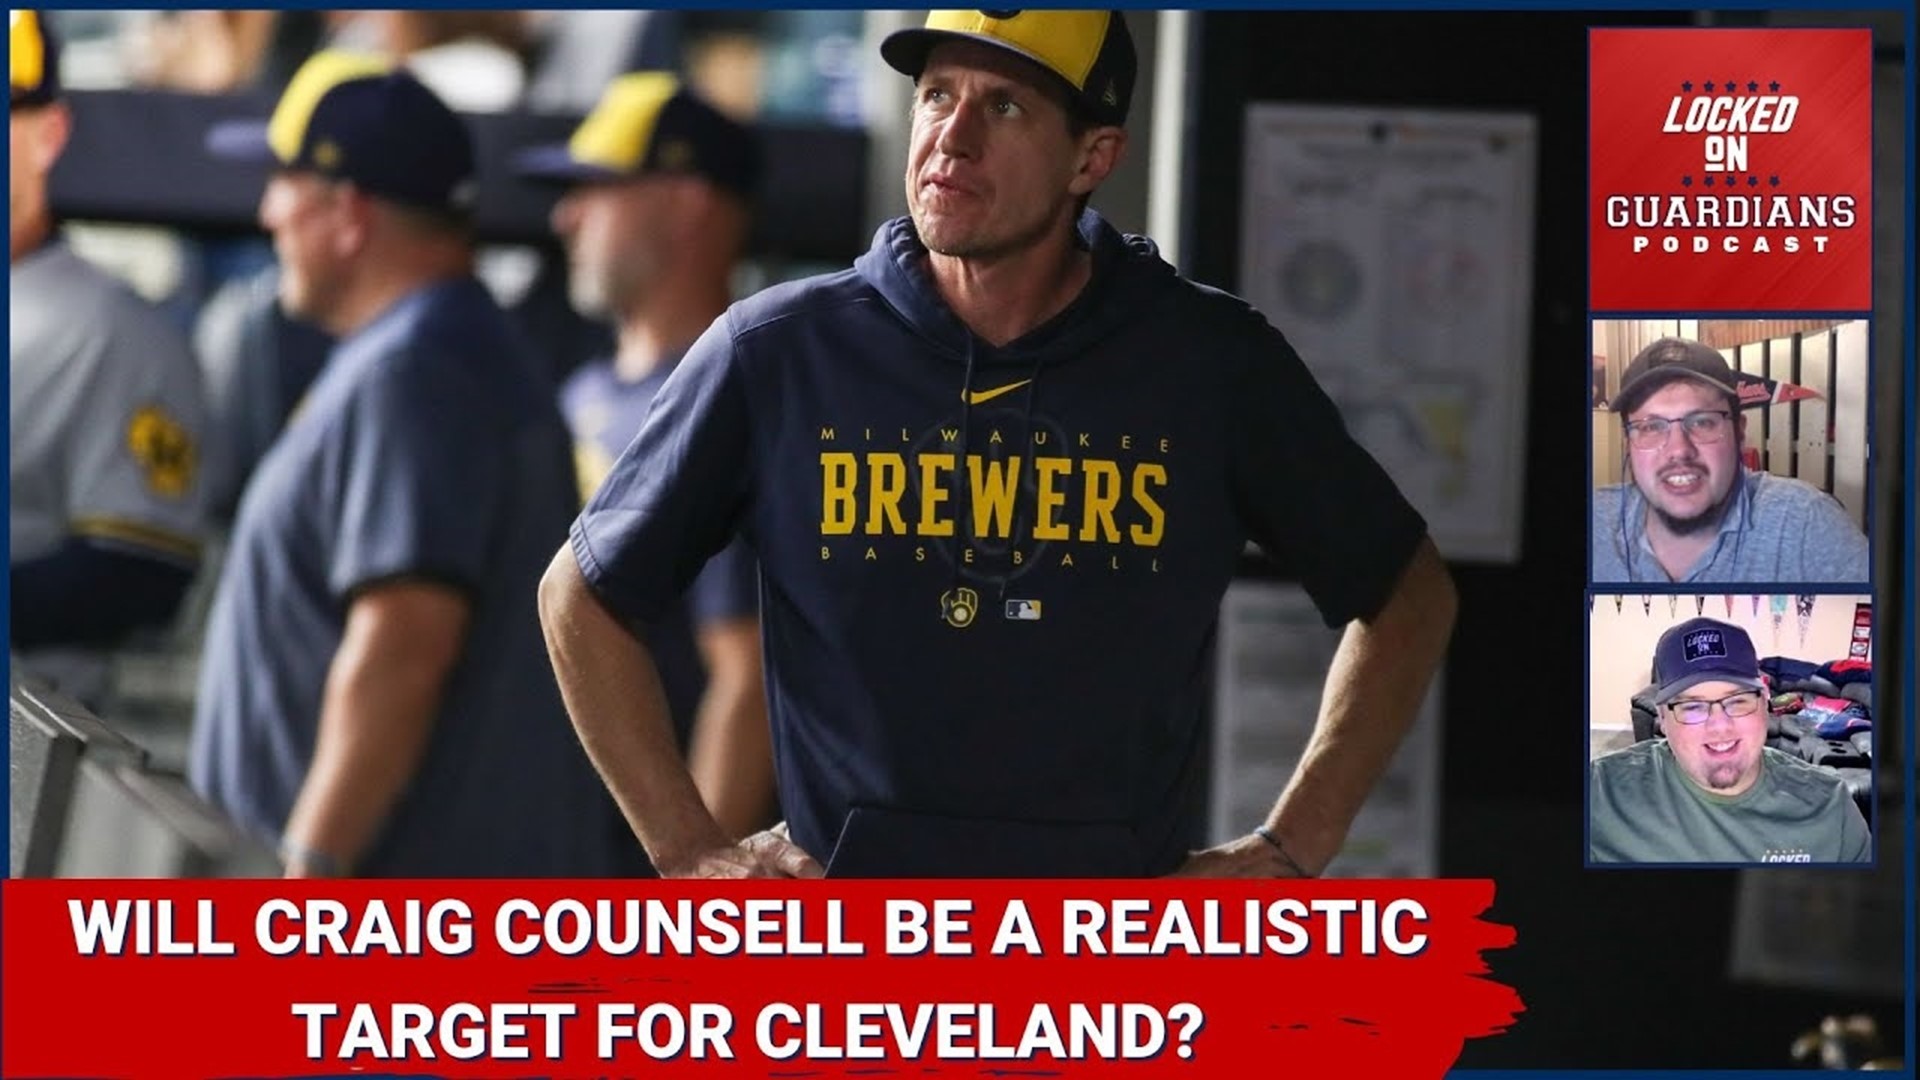 The Milwaukee Brewers were knocked out of the playoffs in the first round in two games. That makes Craig Counsell unofficially a free agent manager.